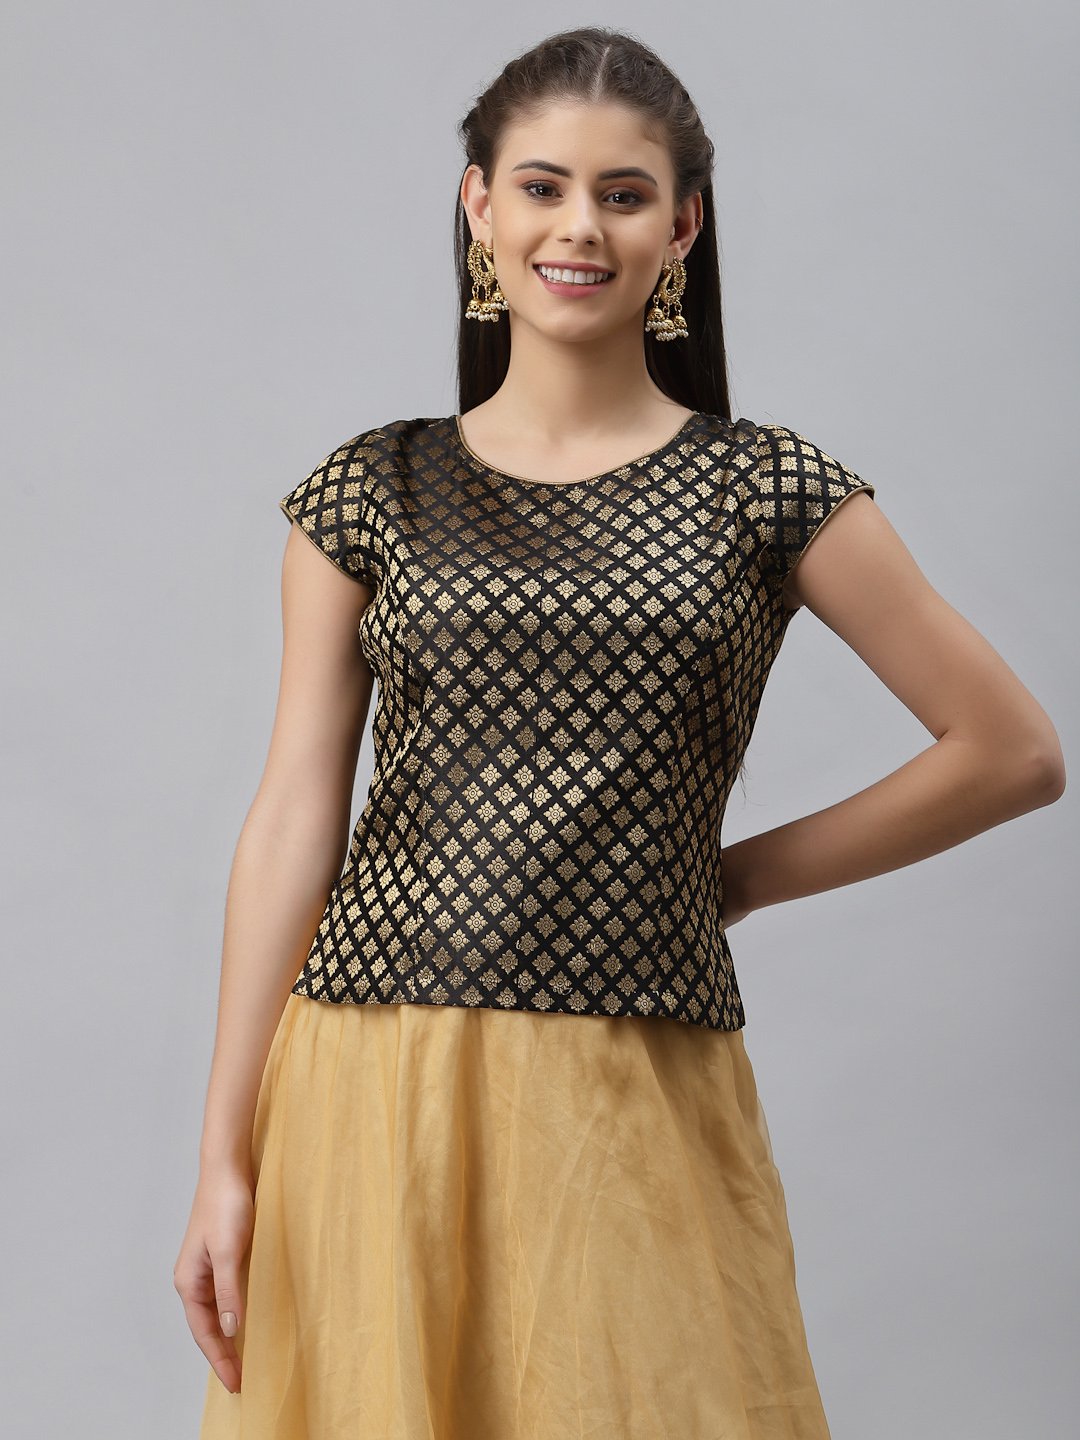 STF LAUNCH FEEL FRESH SOUTH COTTON WITH PRINCESS CUT AND POCKET KURTI -  Reewaz International | Wholesaler & Exporter of indian ethnic wear catalogs.